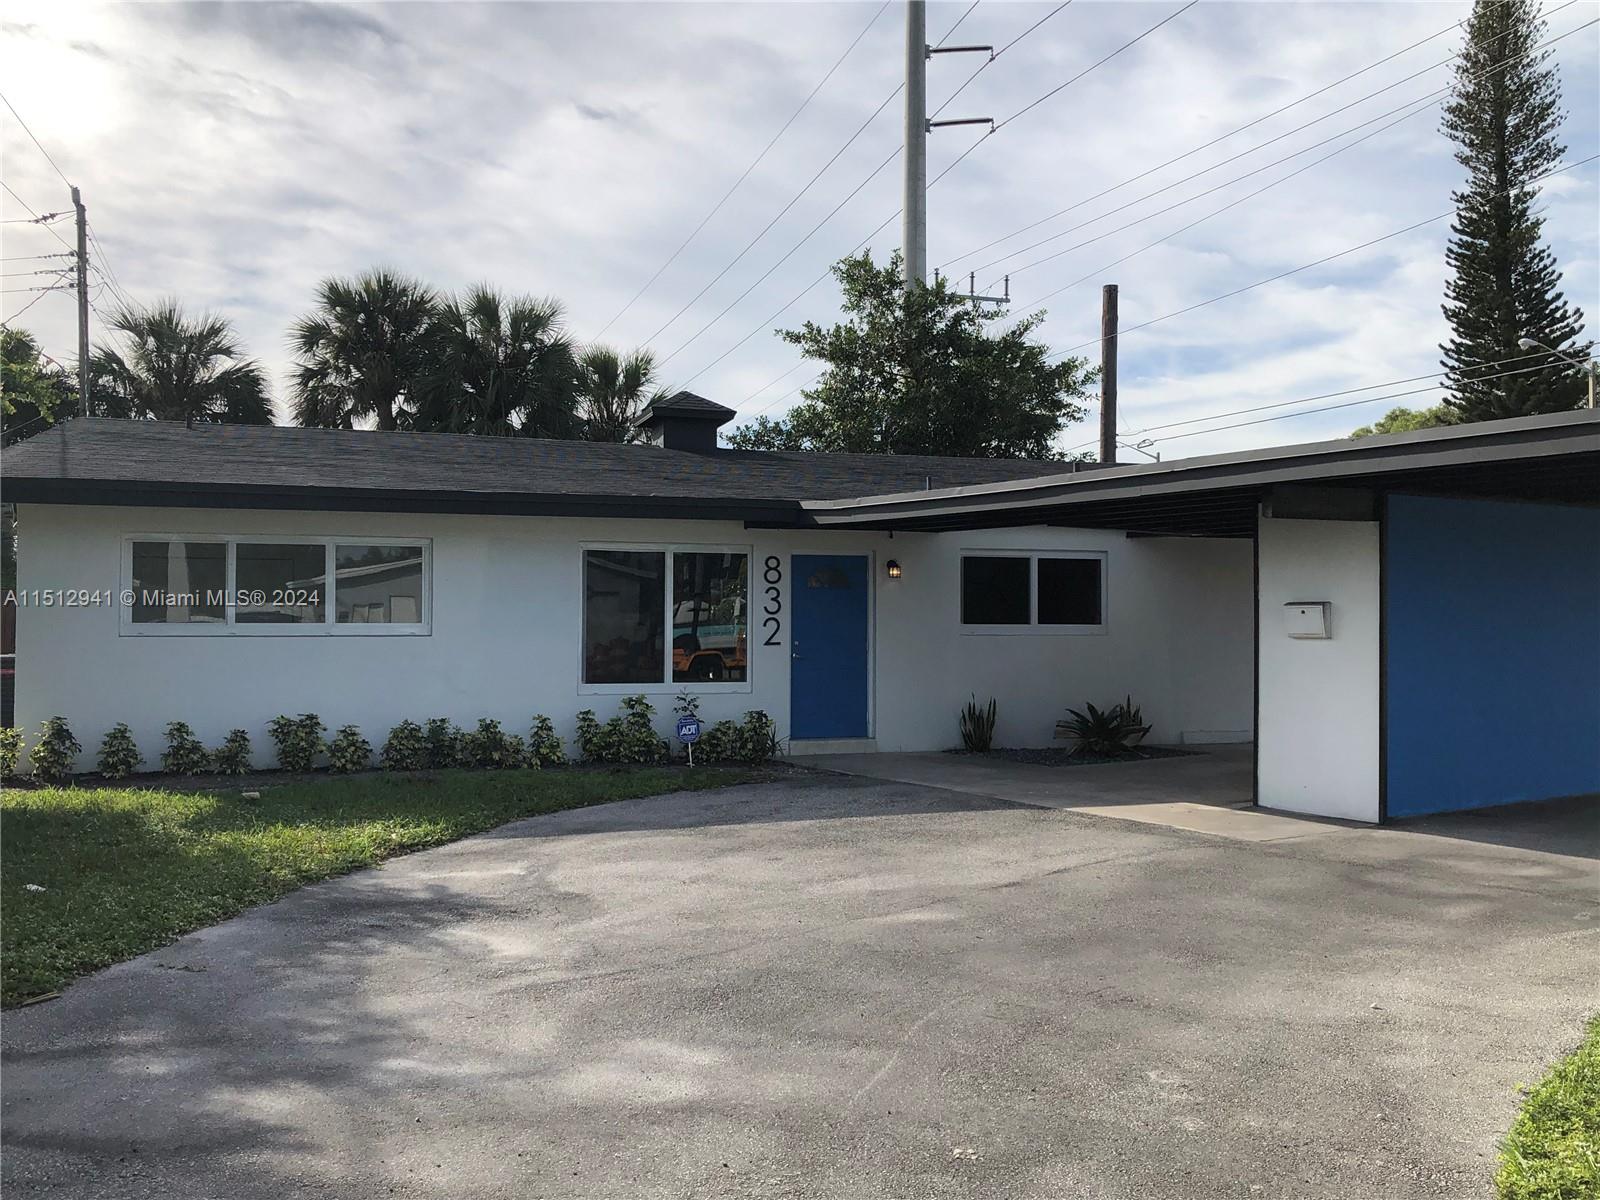 832 Nw 29th St, Wilton Manors, Broward County, Florida - 4 Bedrooms  
2 Bathrooms - 